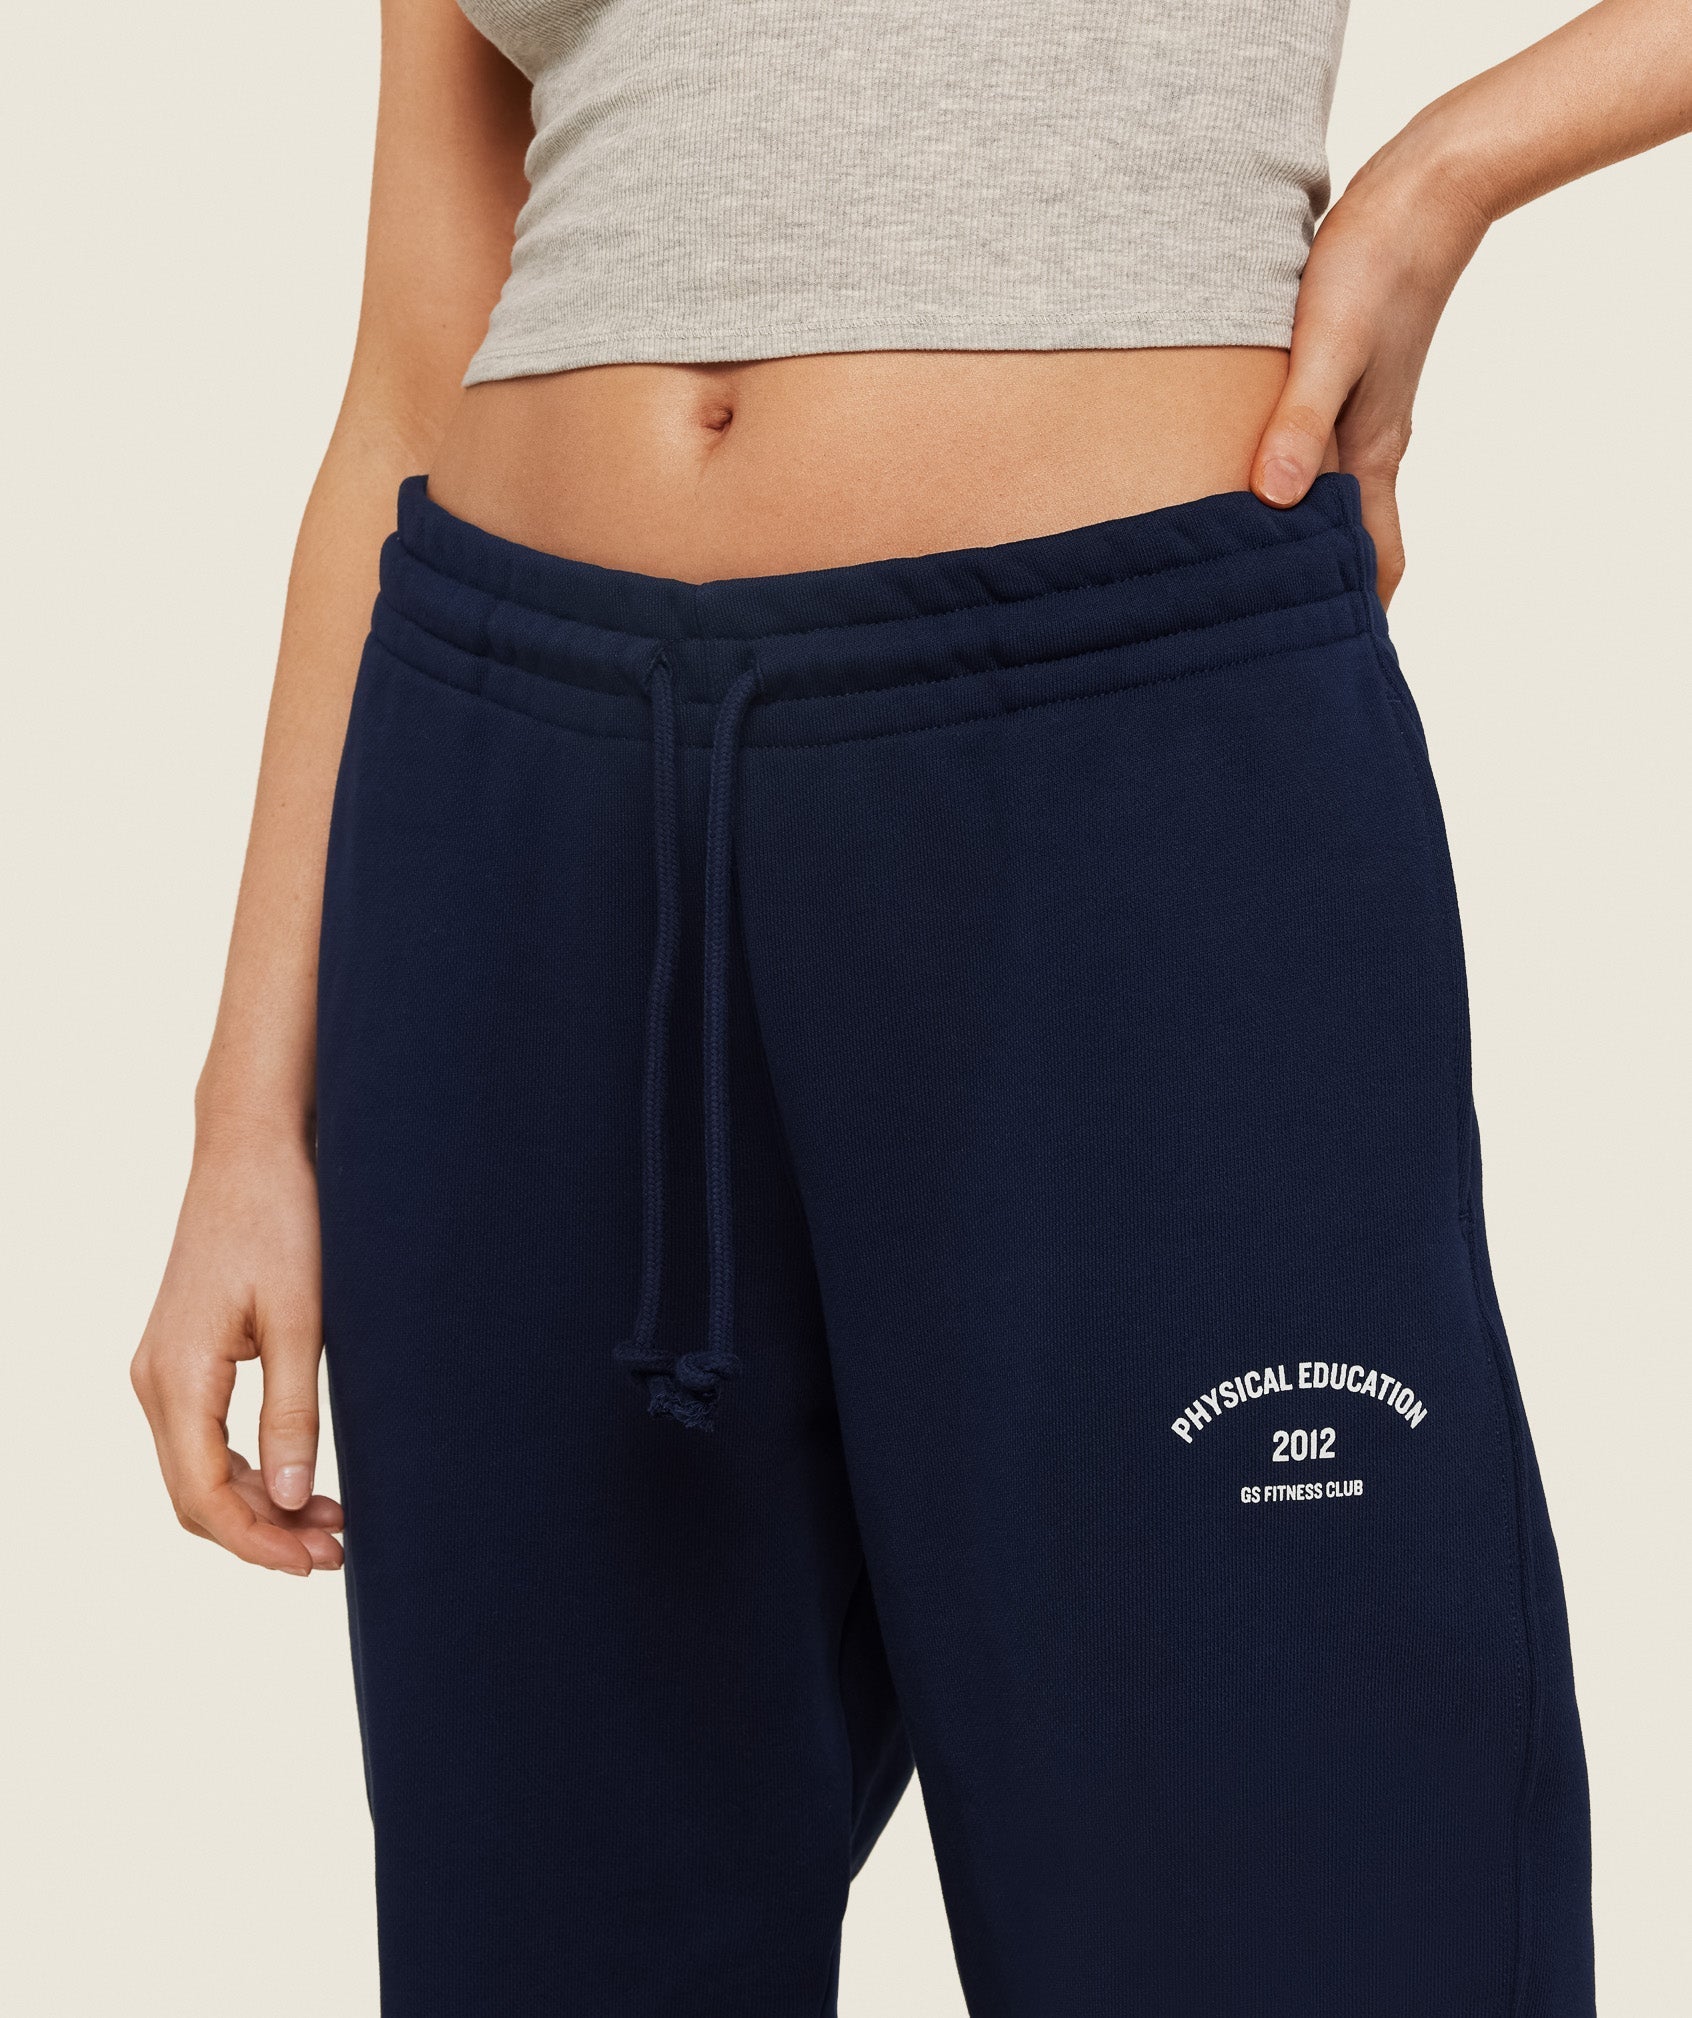 Phys Ed Graphic Sweatpants in Blue - view 3